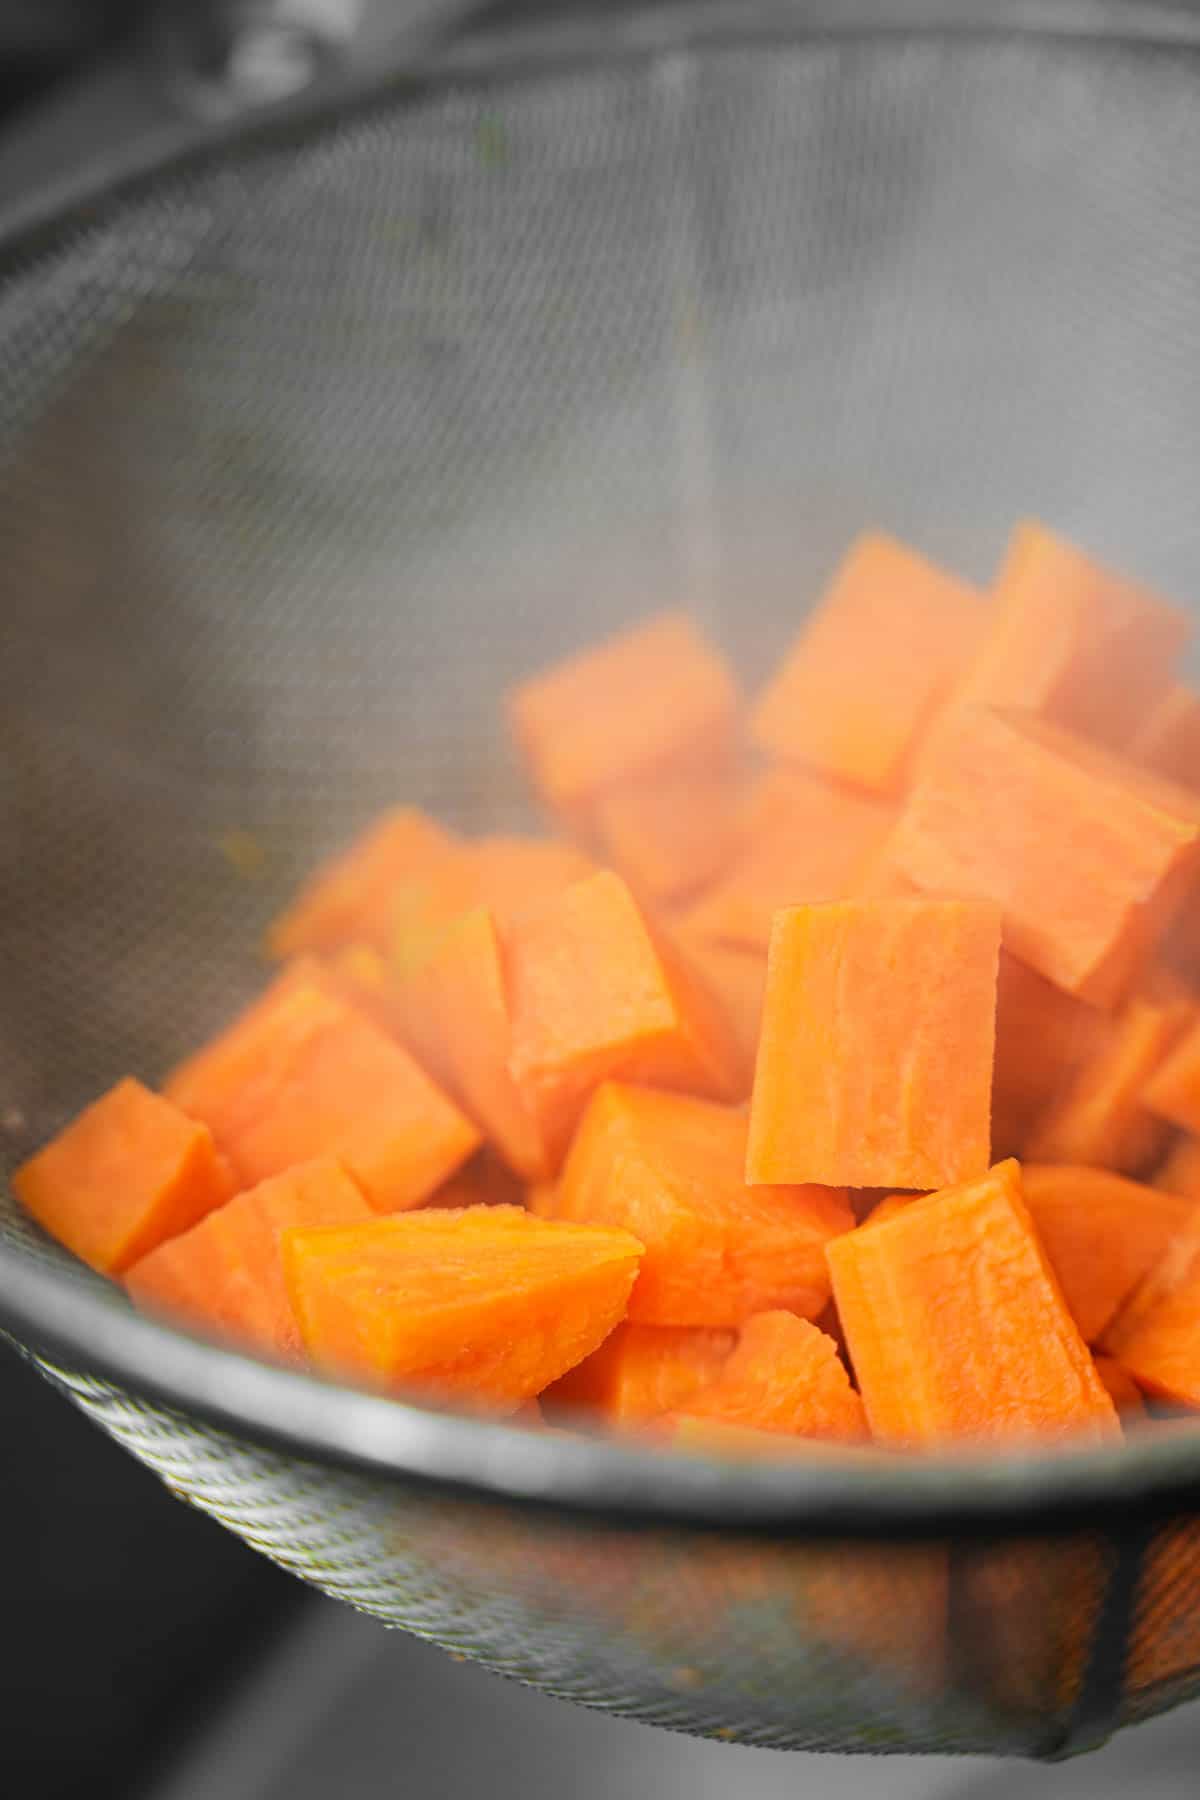 Par-cooked sweet potatoes are drained in a wire mesh strainer.